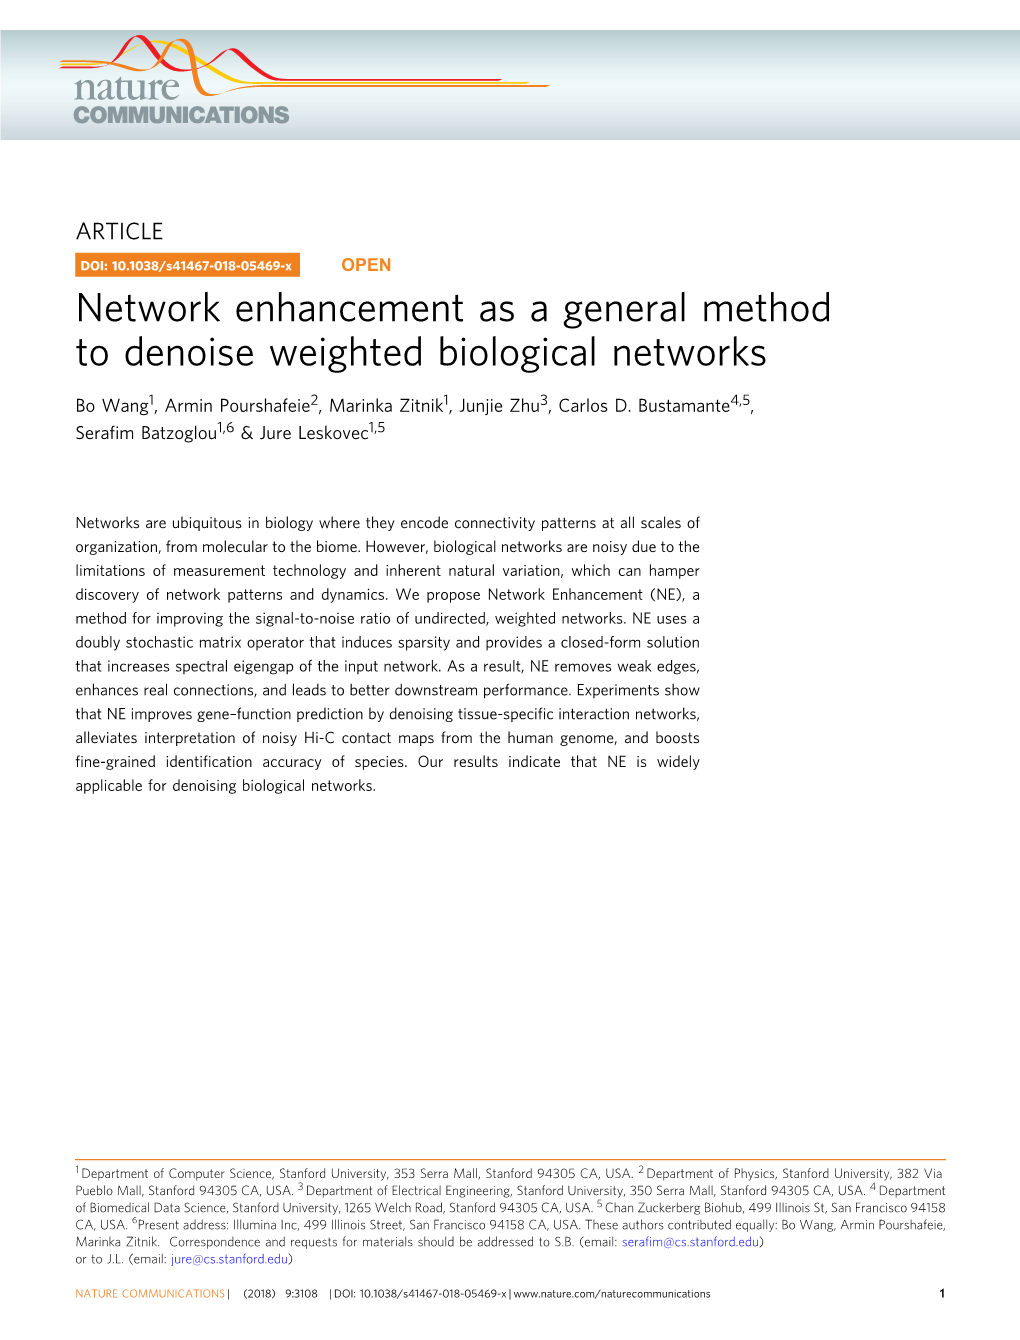 Network Enhancement As a General Method to Denoise Weighted Biological Networks